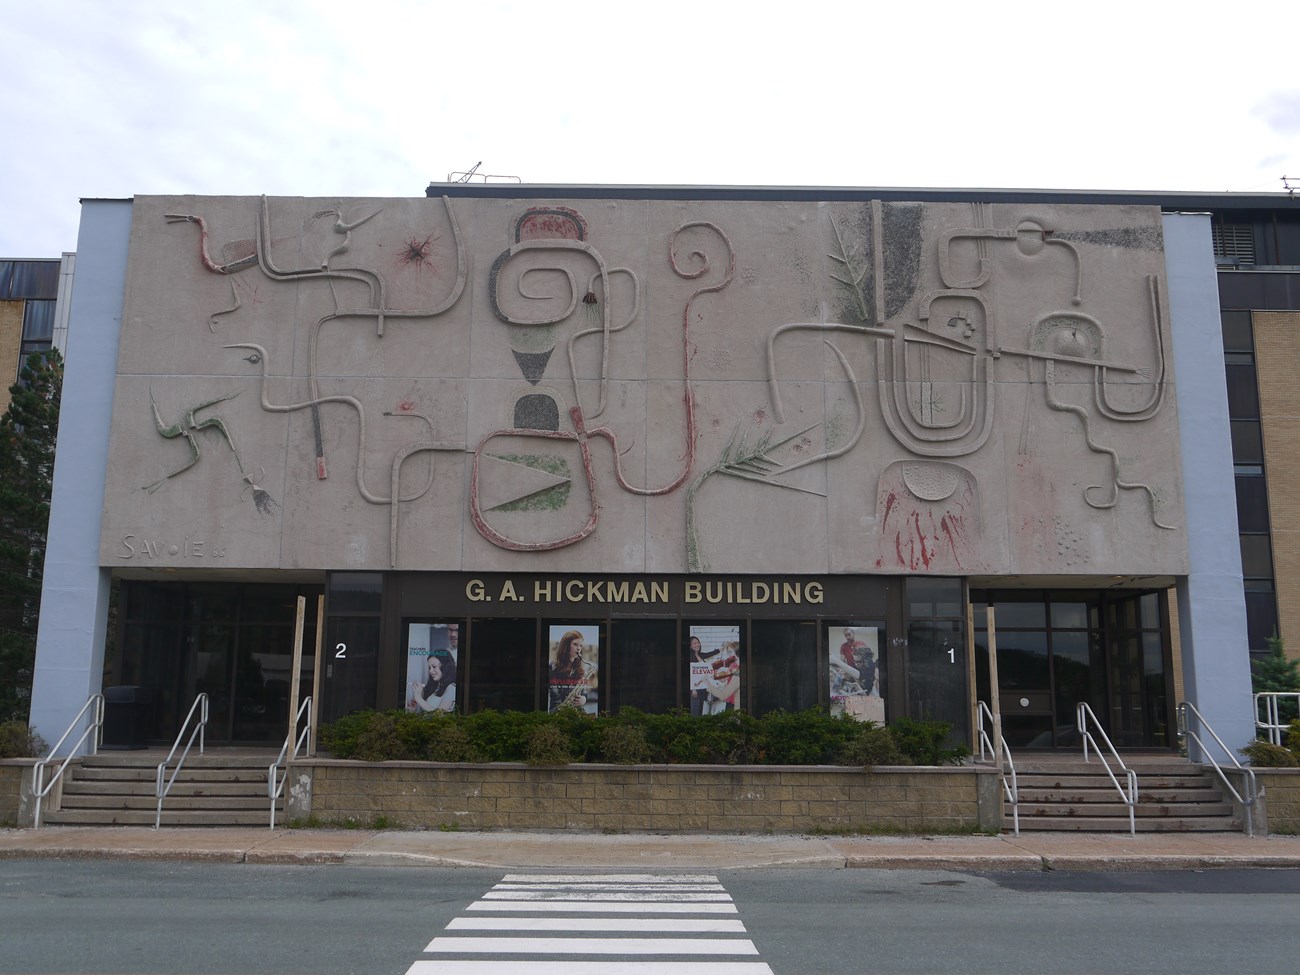 3-D abstract mural façade of the G.A. Hickman Building.